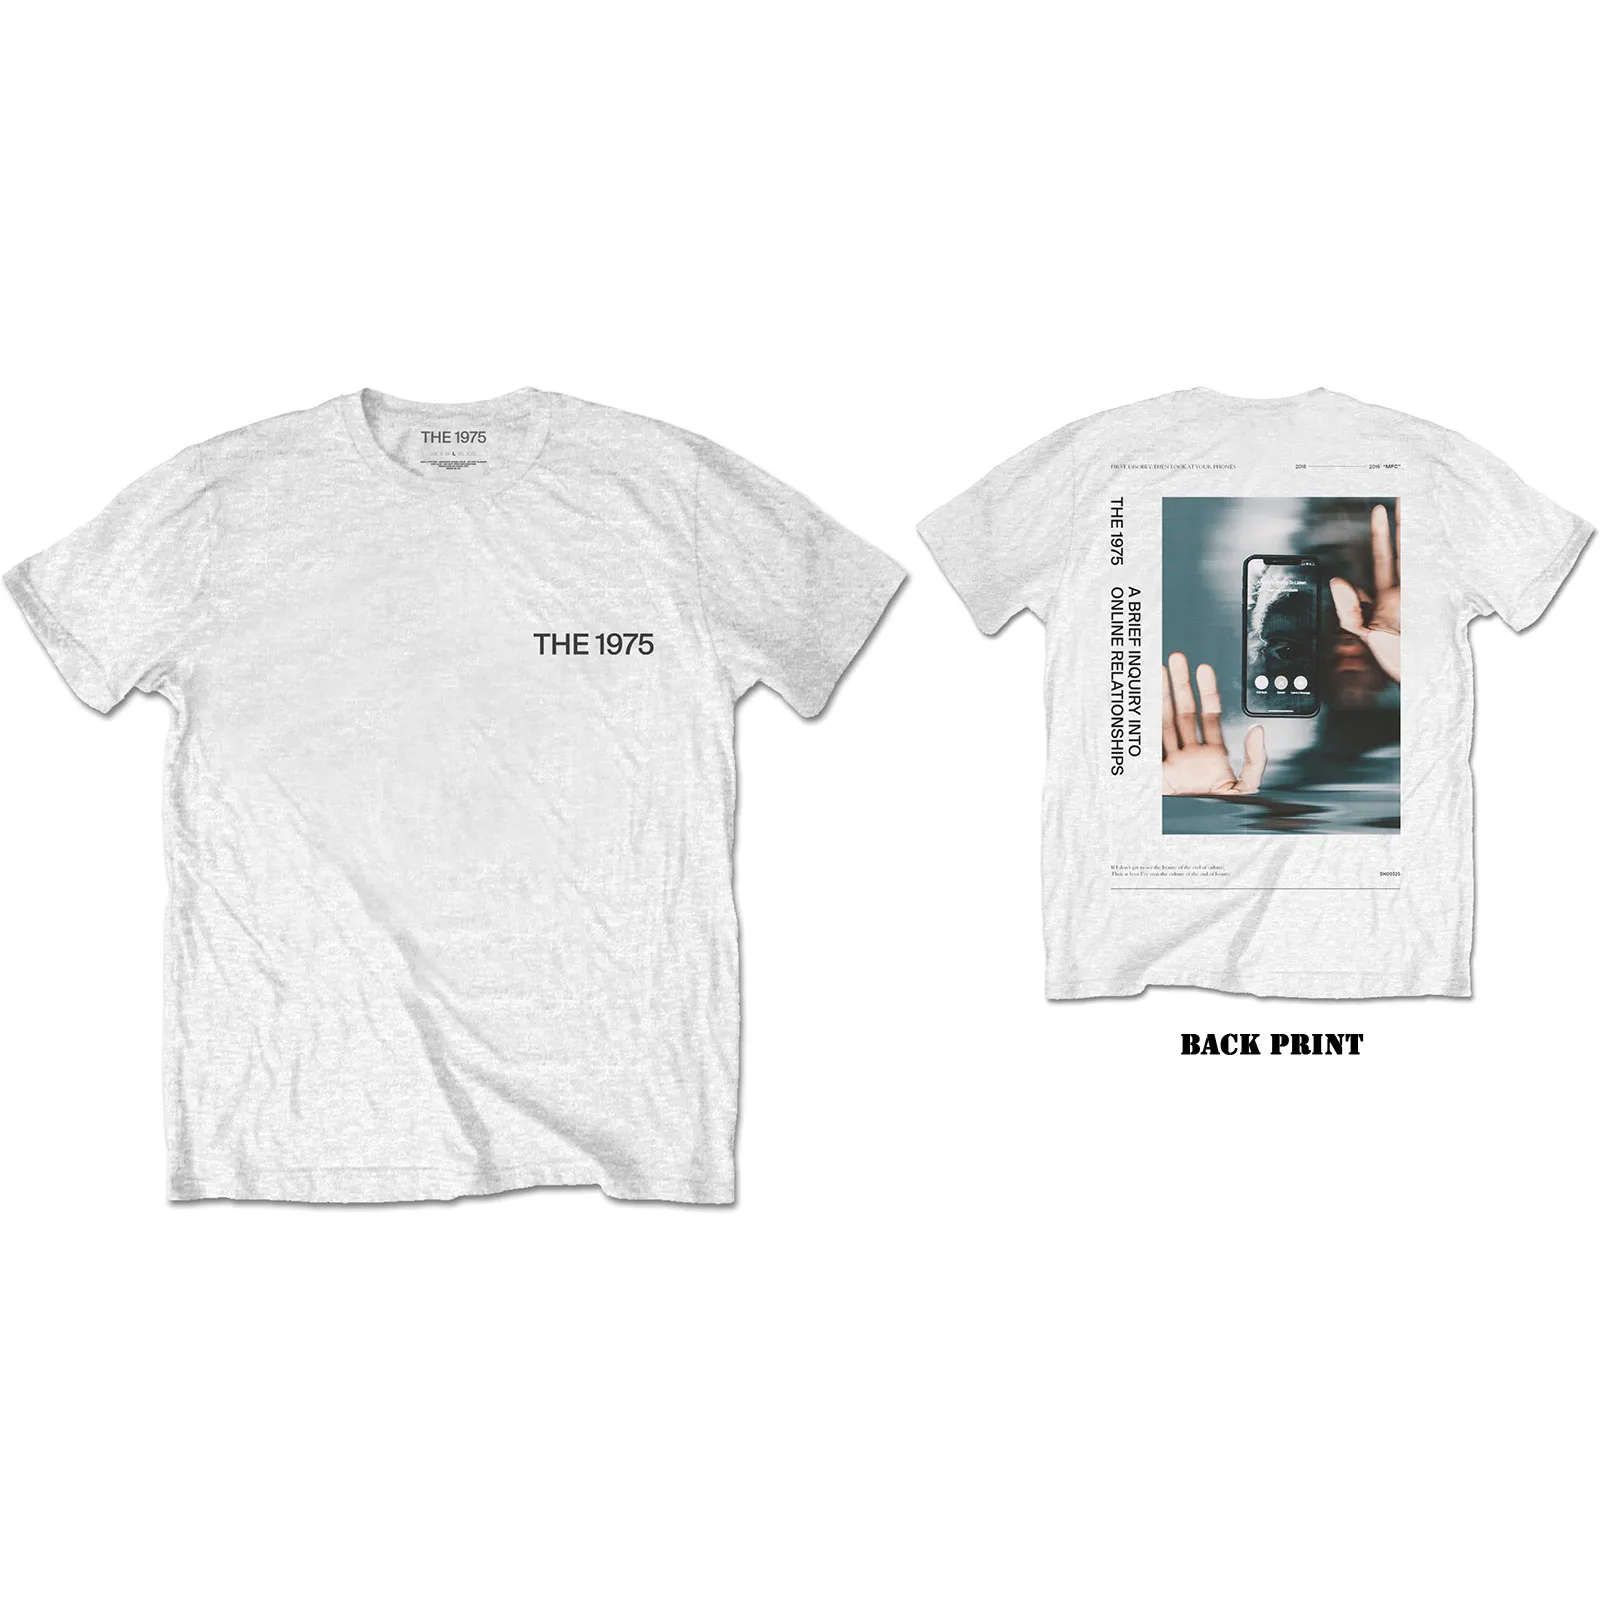 The 1975 - Unisex T-Shirt ABIIOR Side Face Time Back Print artwork